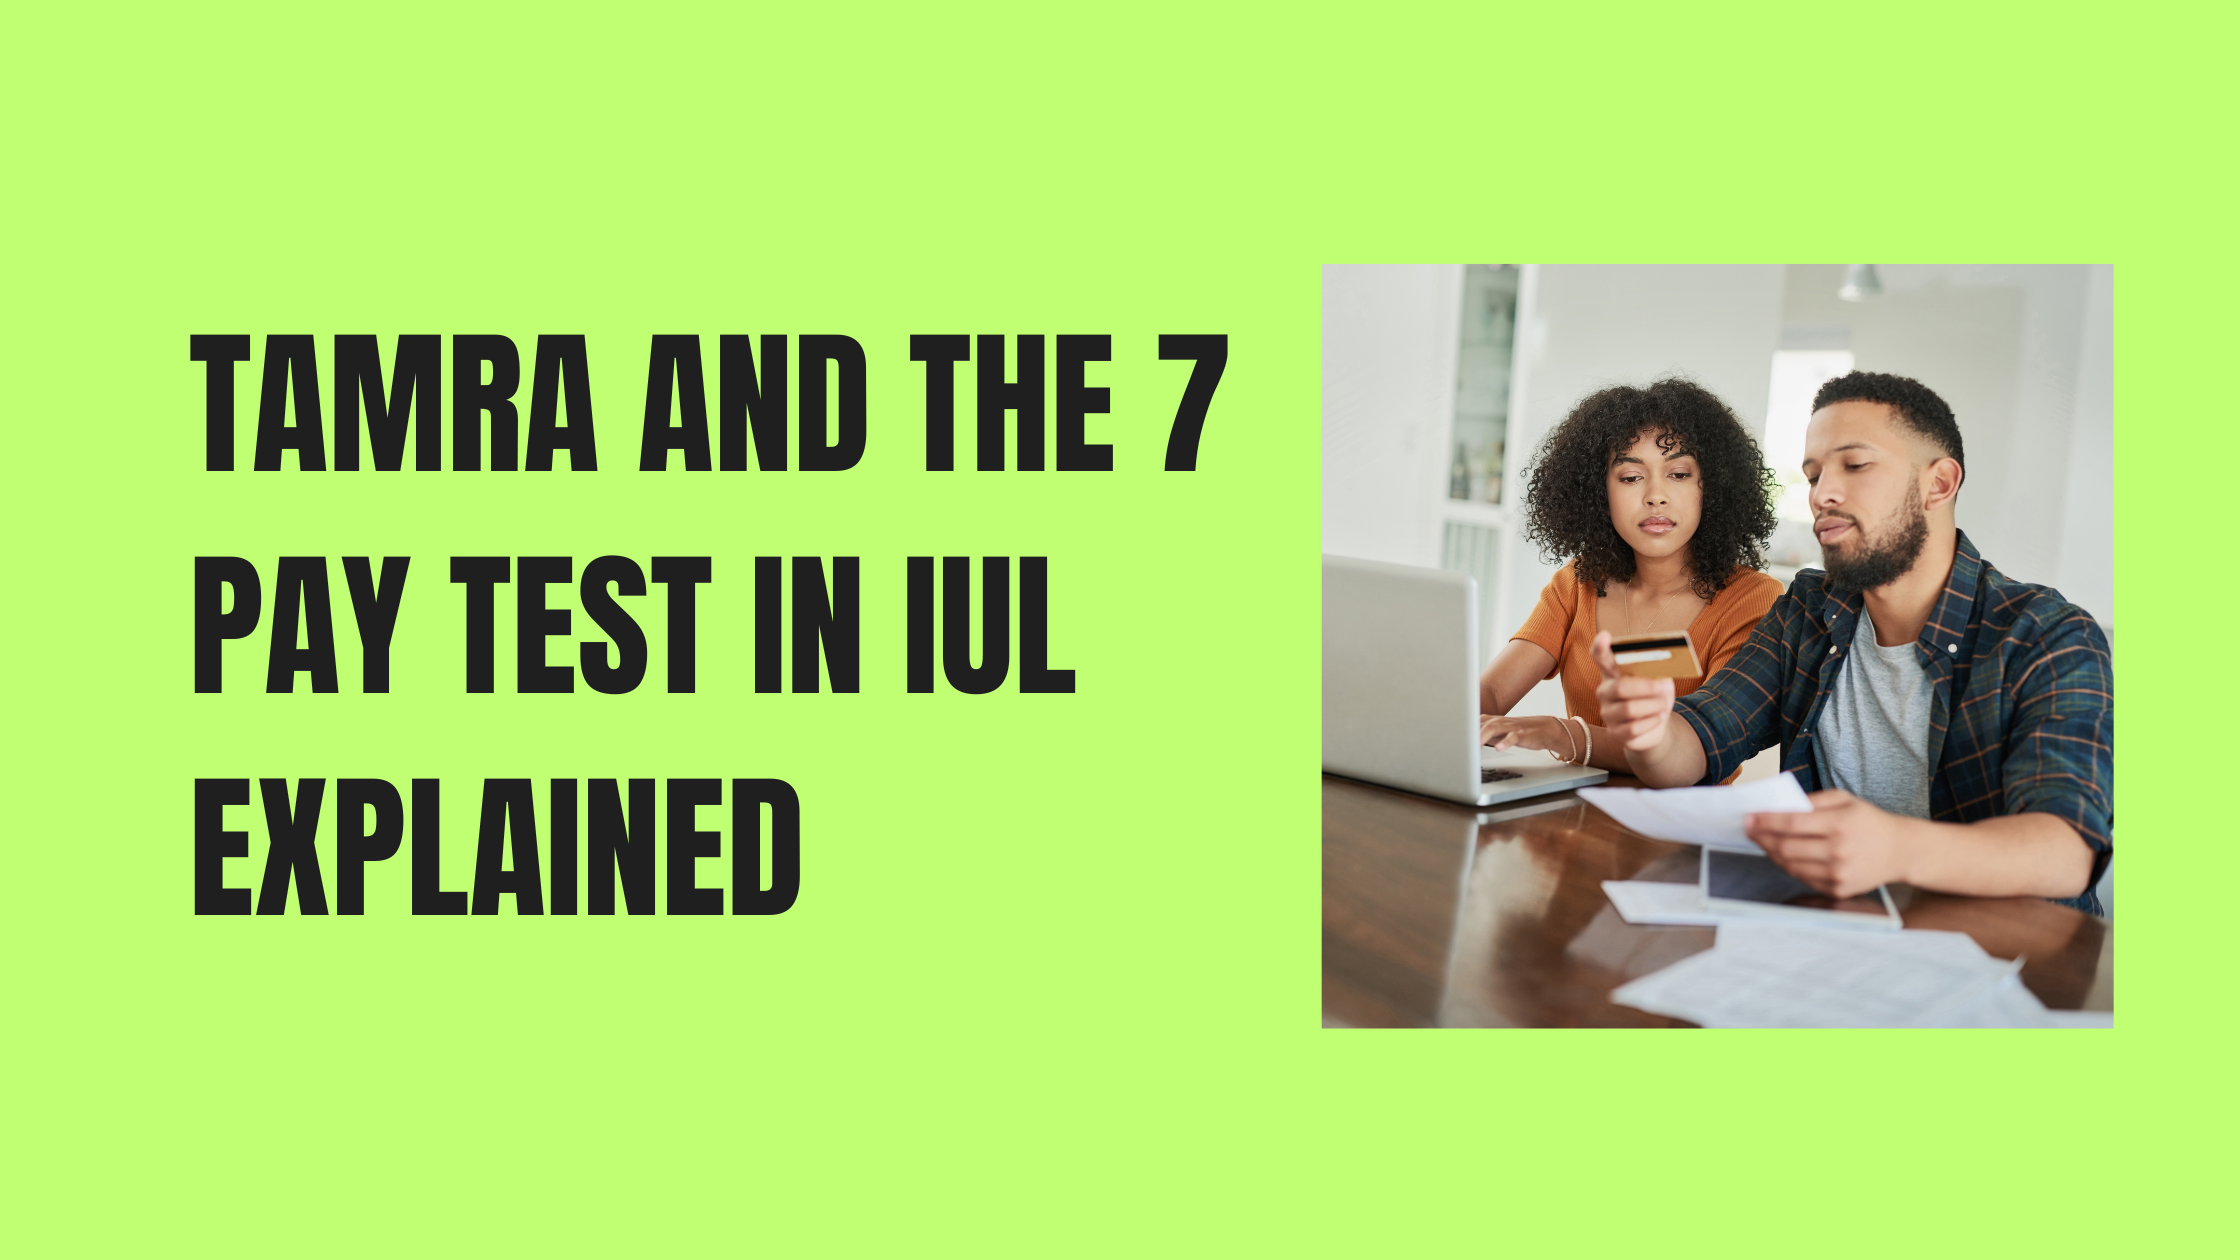 TAMRA and the 7 Pay Test in IUL Explained